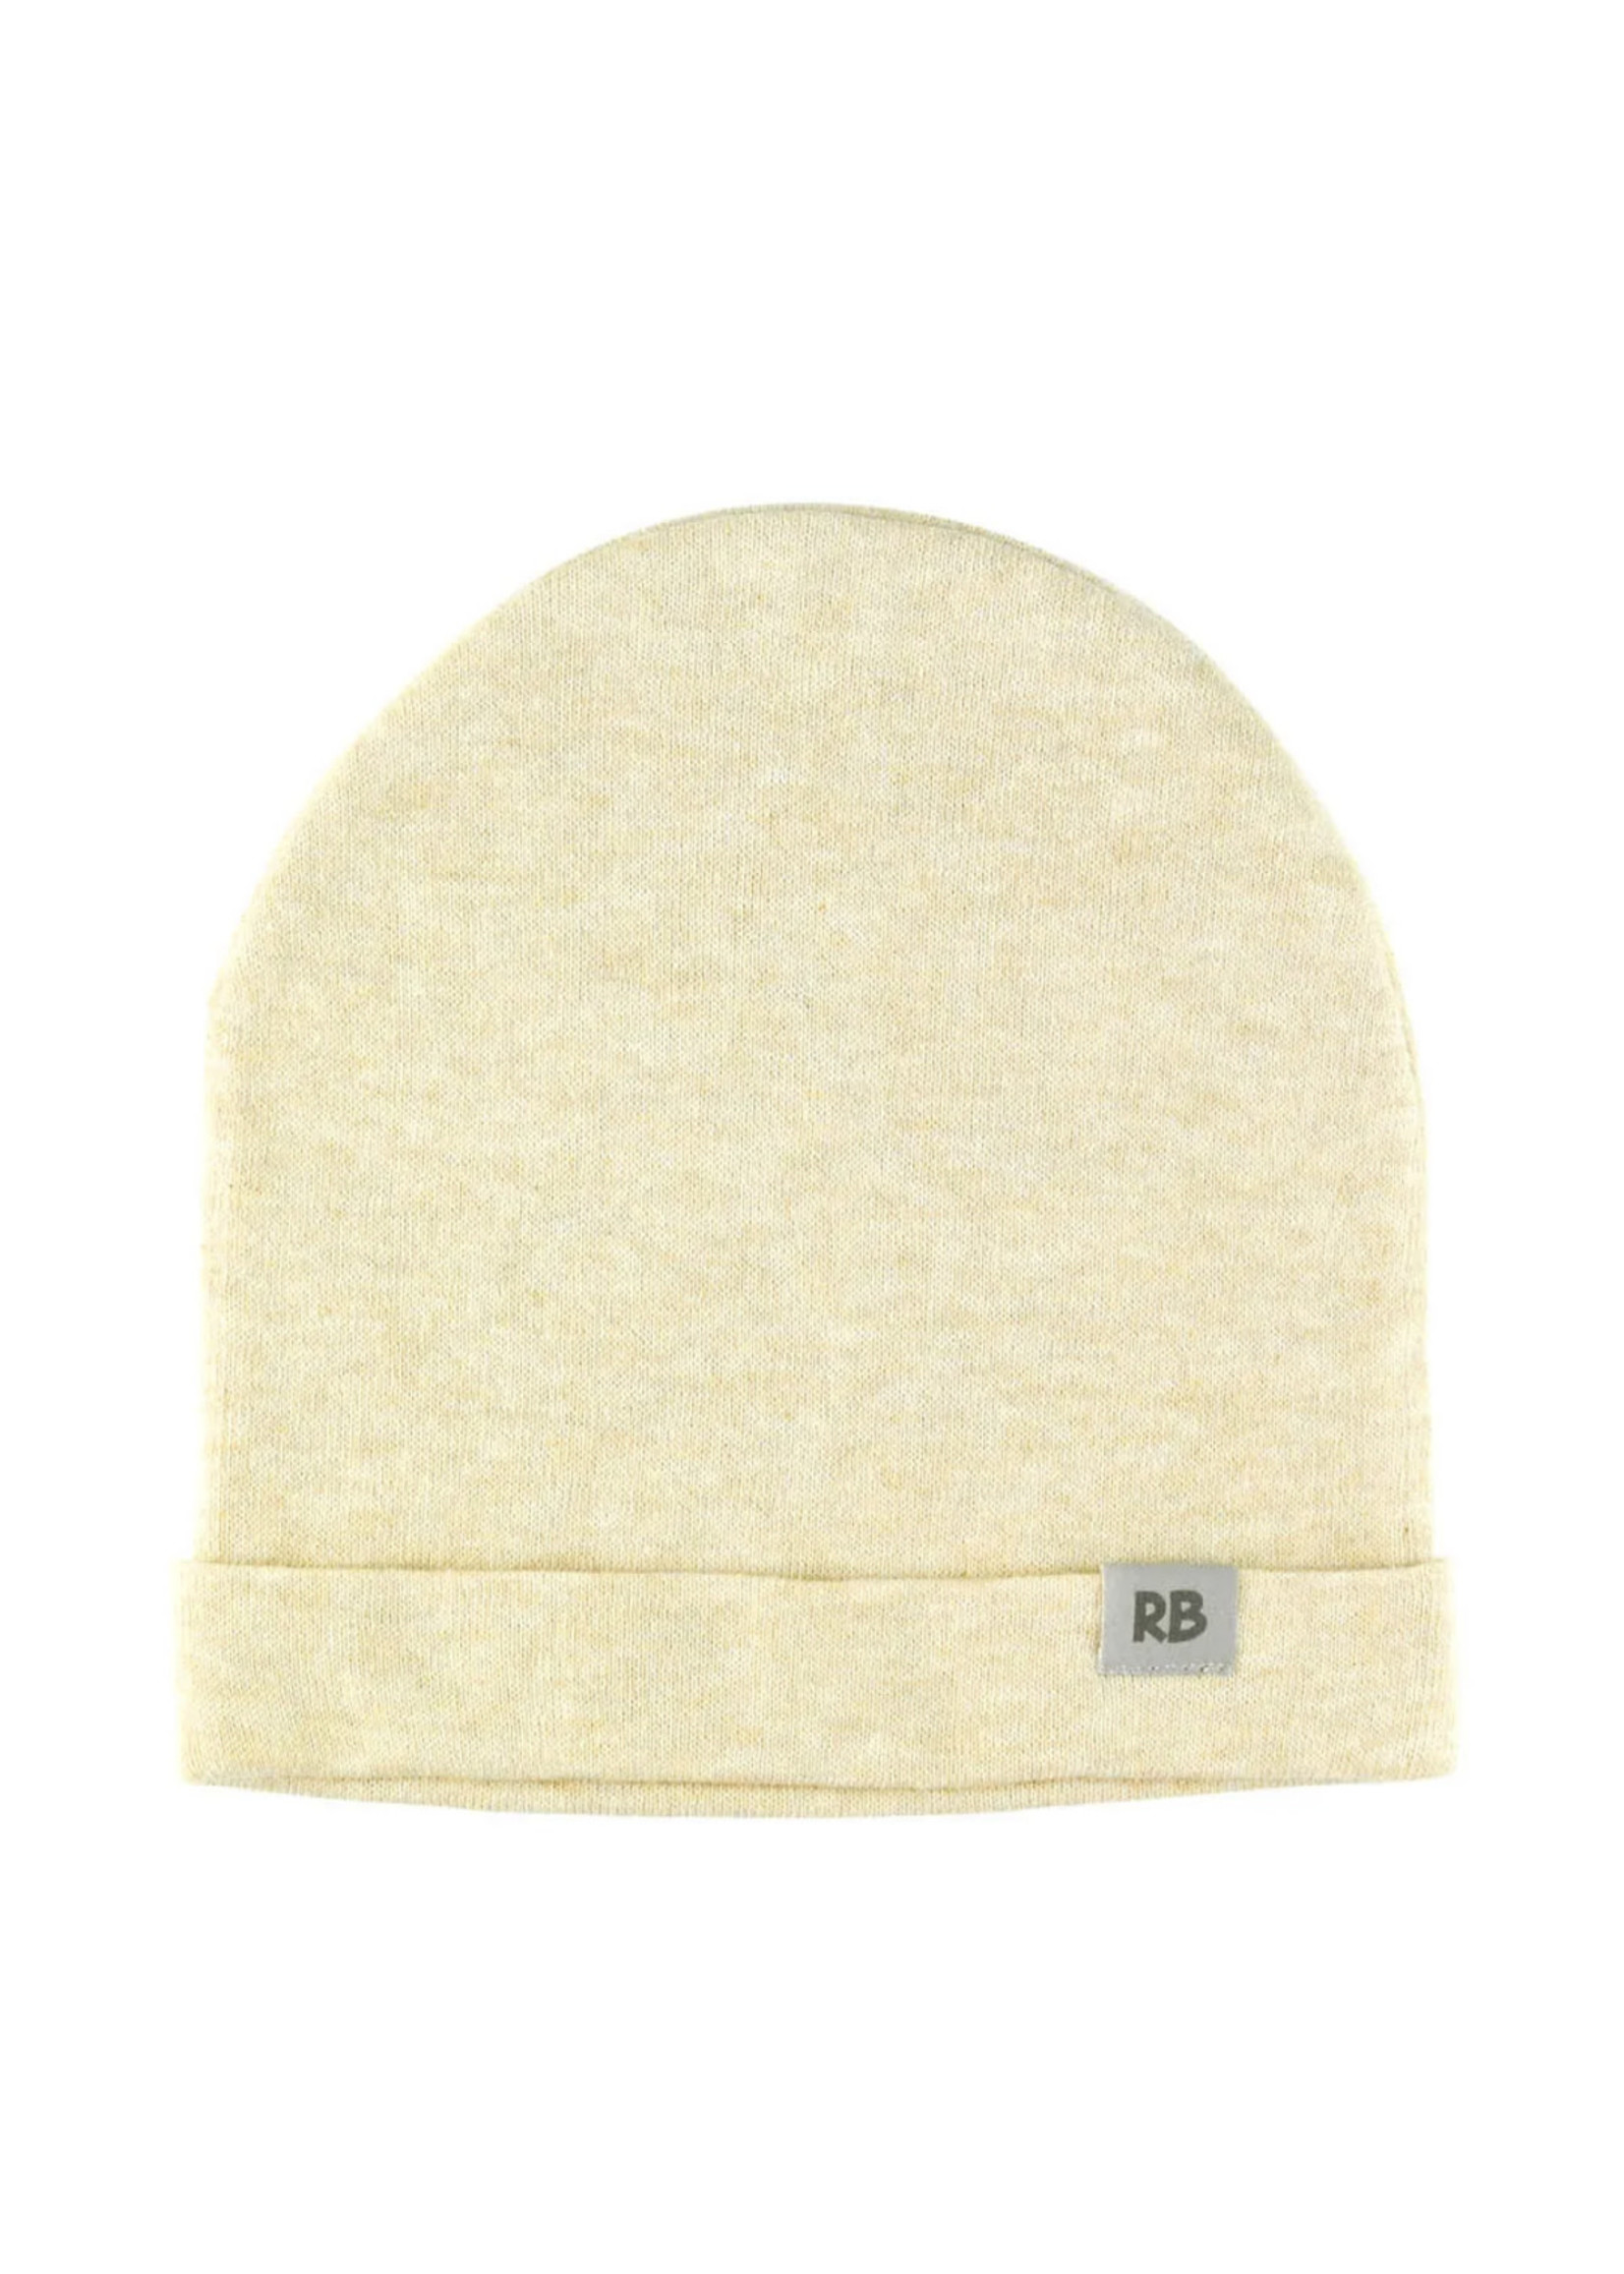 Rugged Butts Baby Slouch Beanie